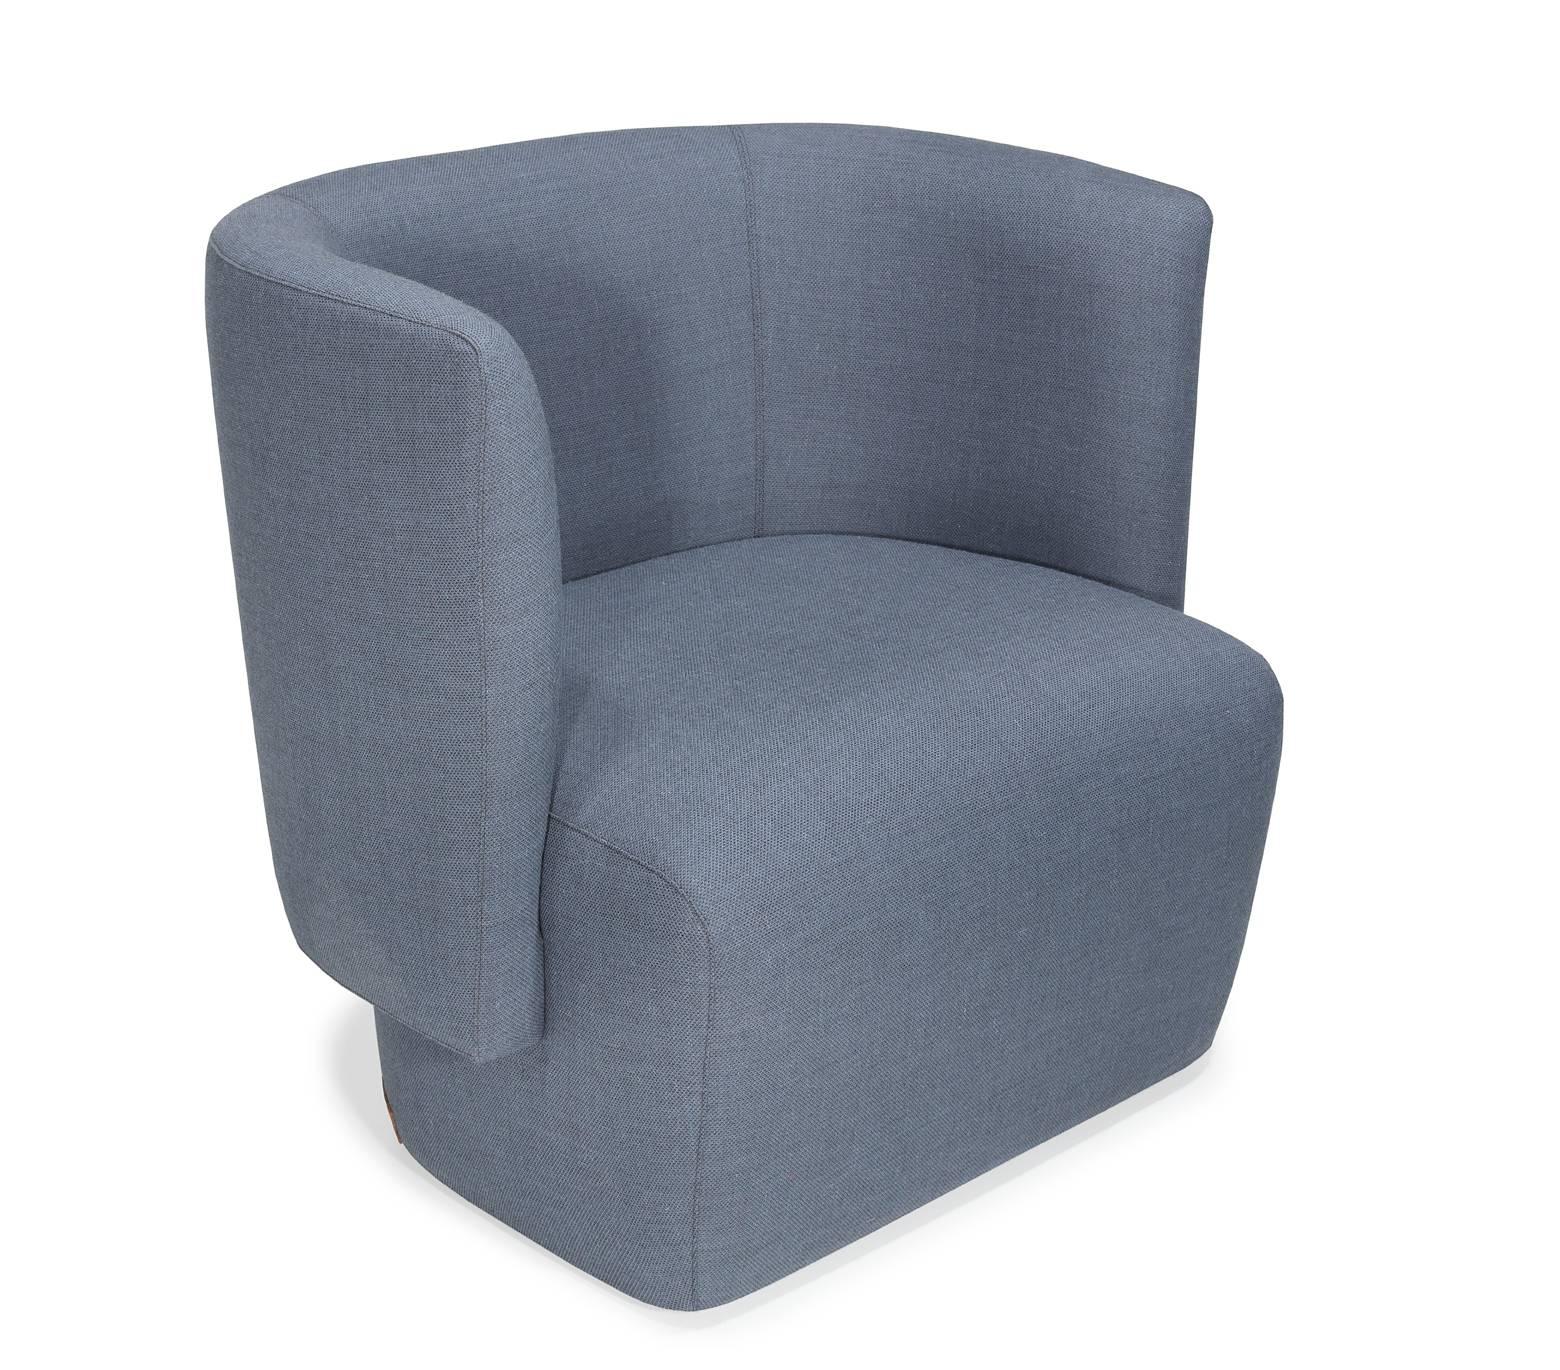 Pair of European Modern Fabric Armchairs for Modular Configurations For Sale 4